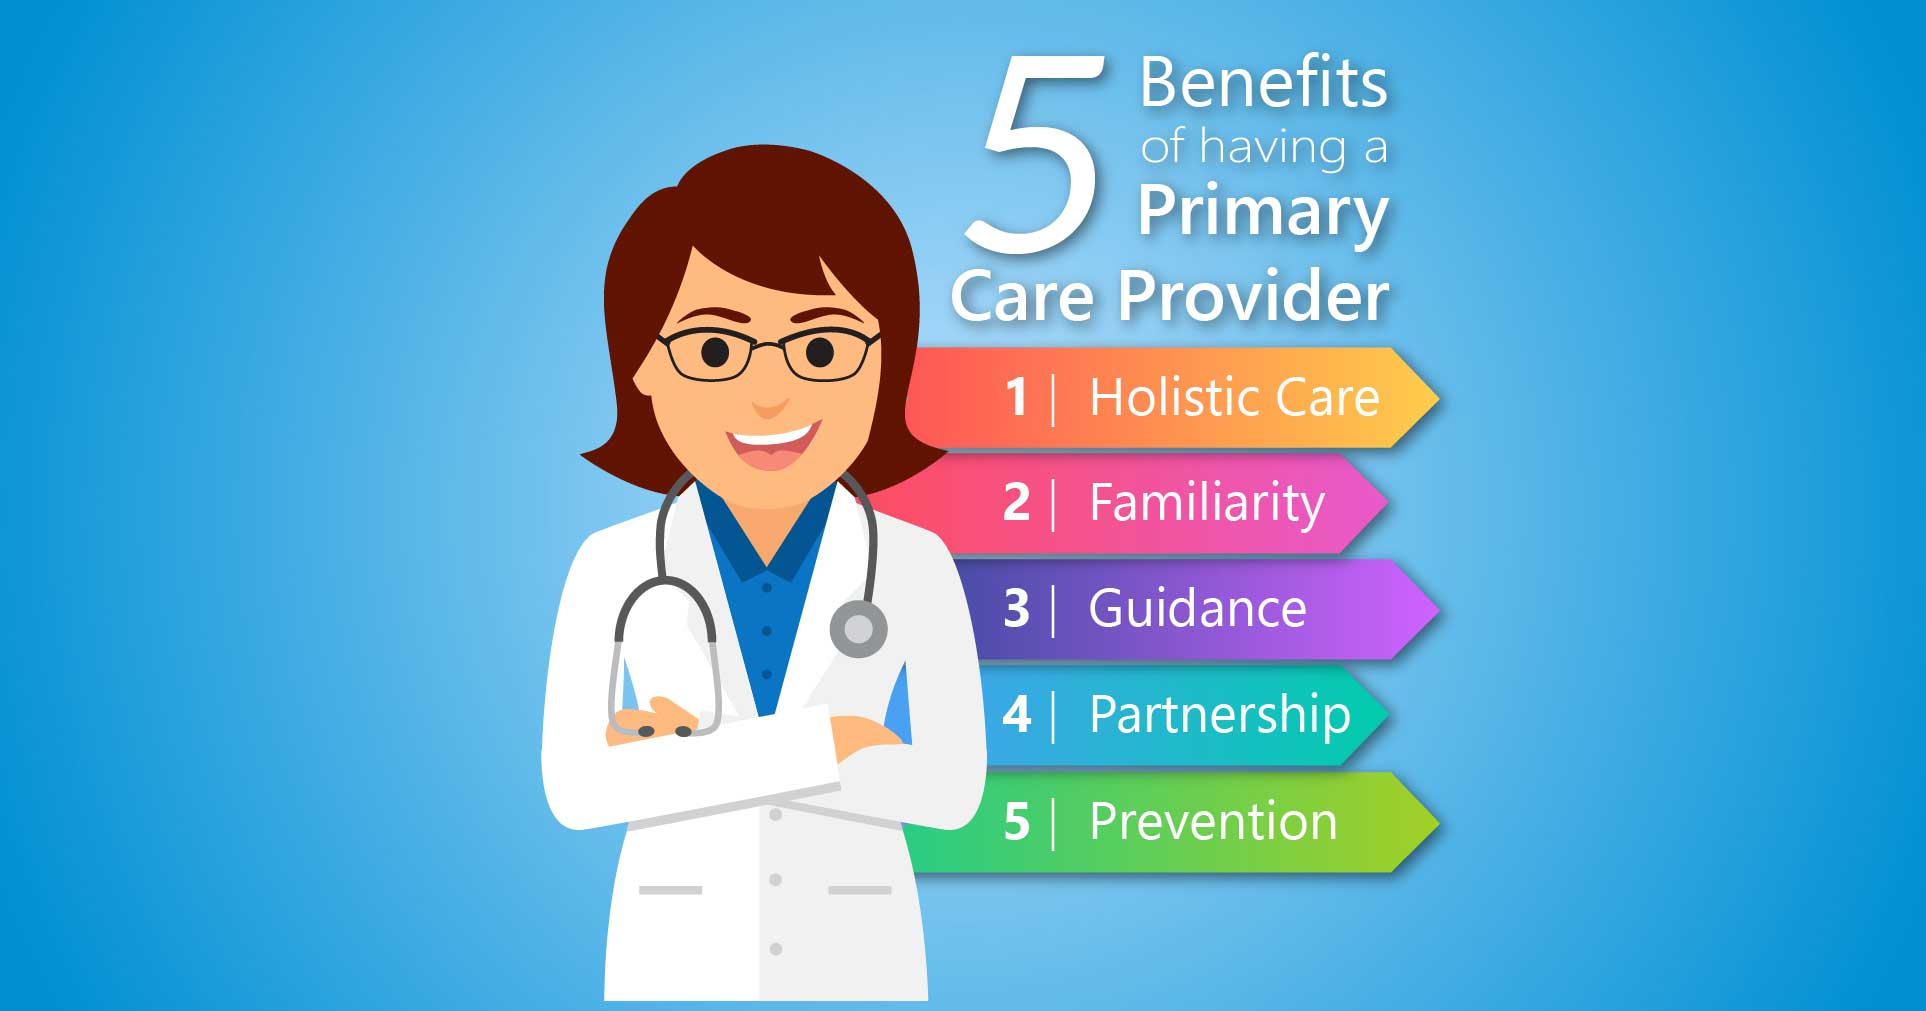 5 Benefits of Primary Care Provider